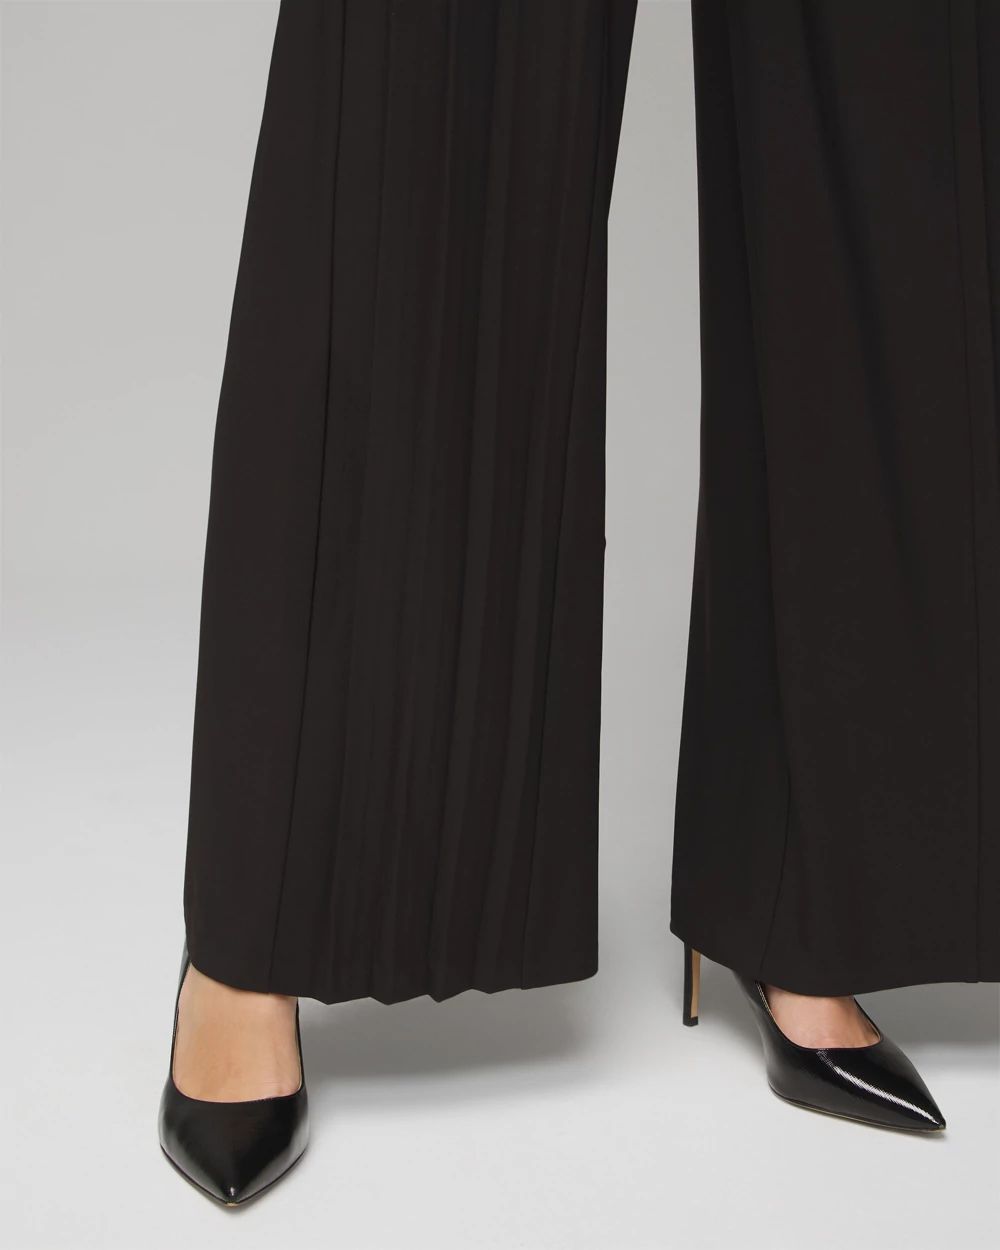 Petite Matte Jersey Pleated Wide Leg click to view larger image.